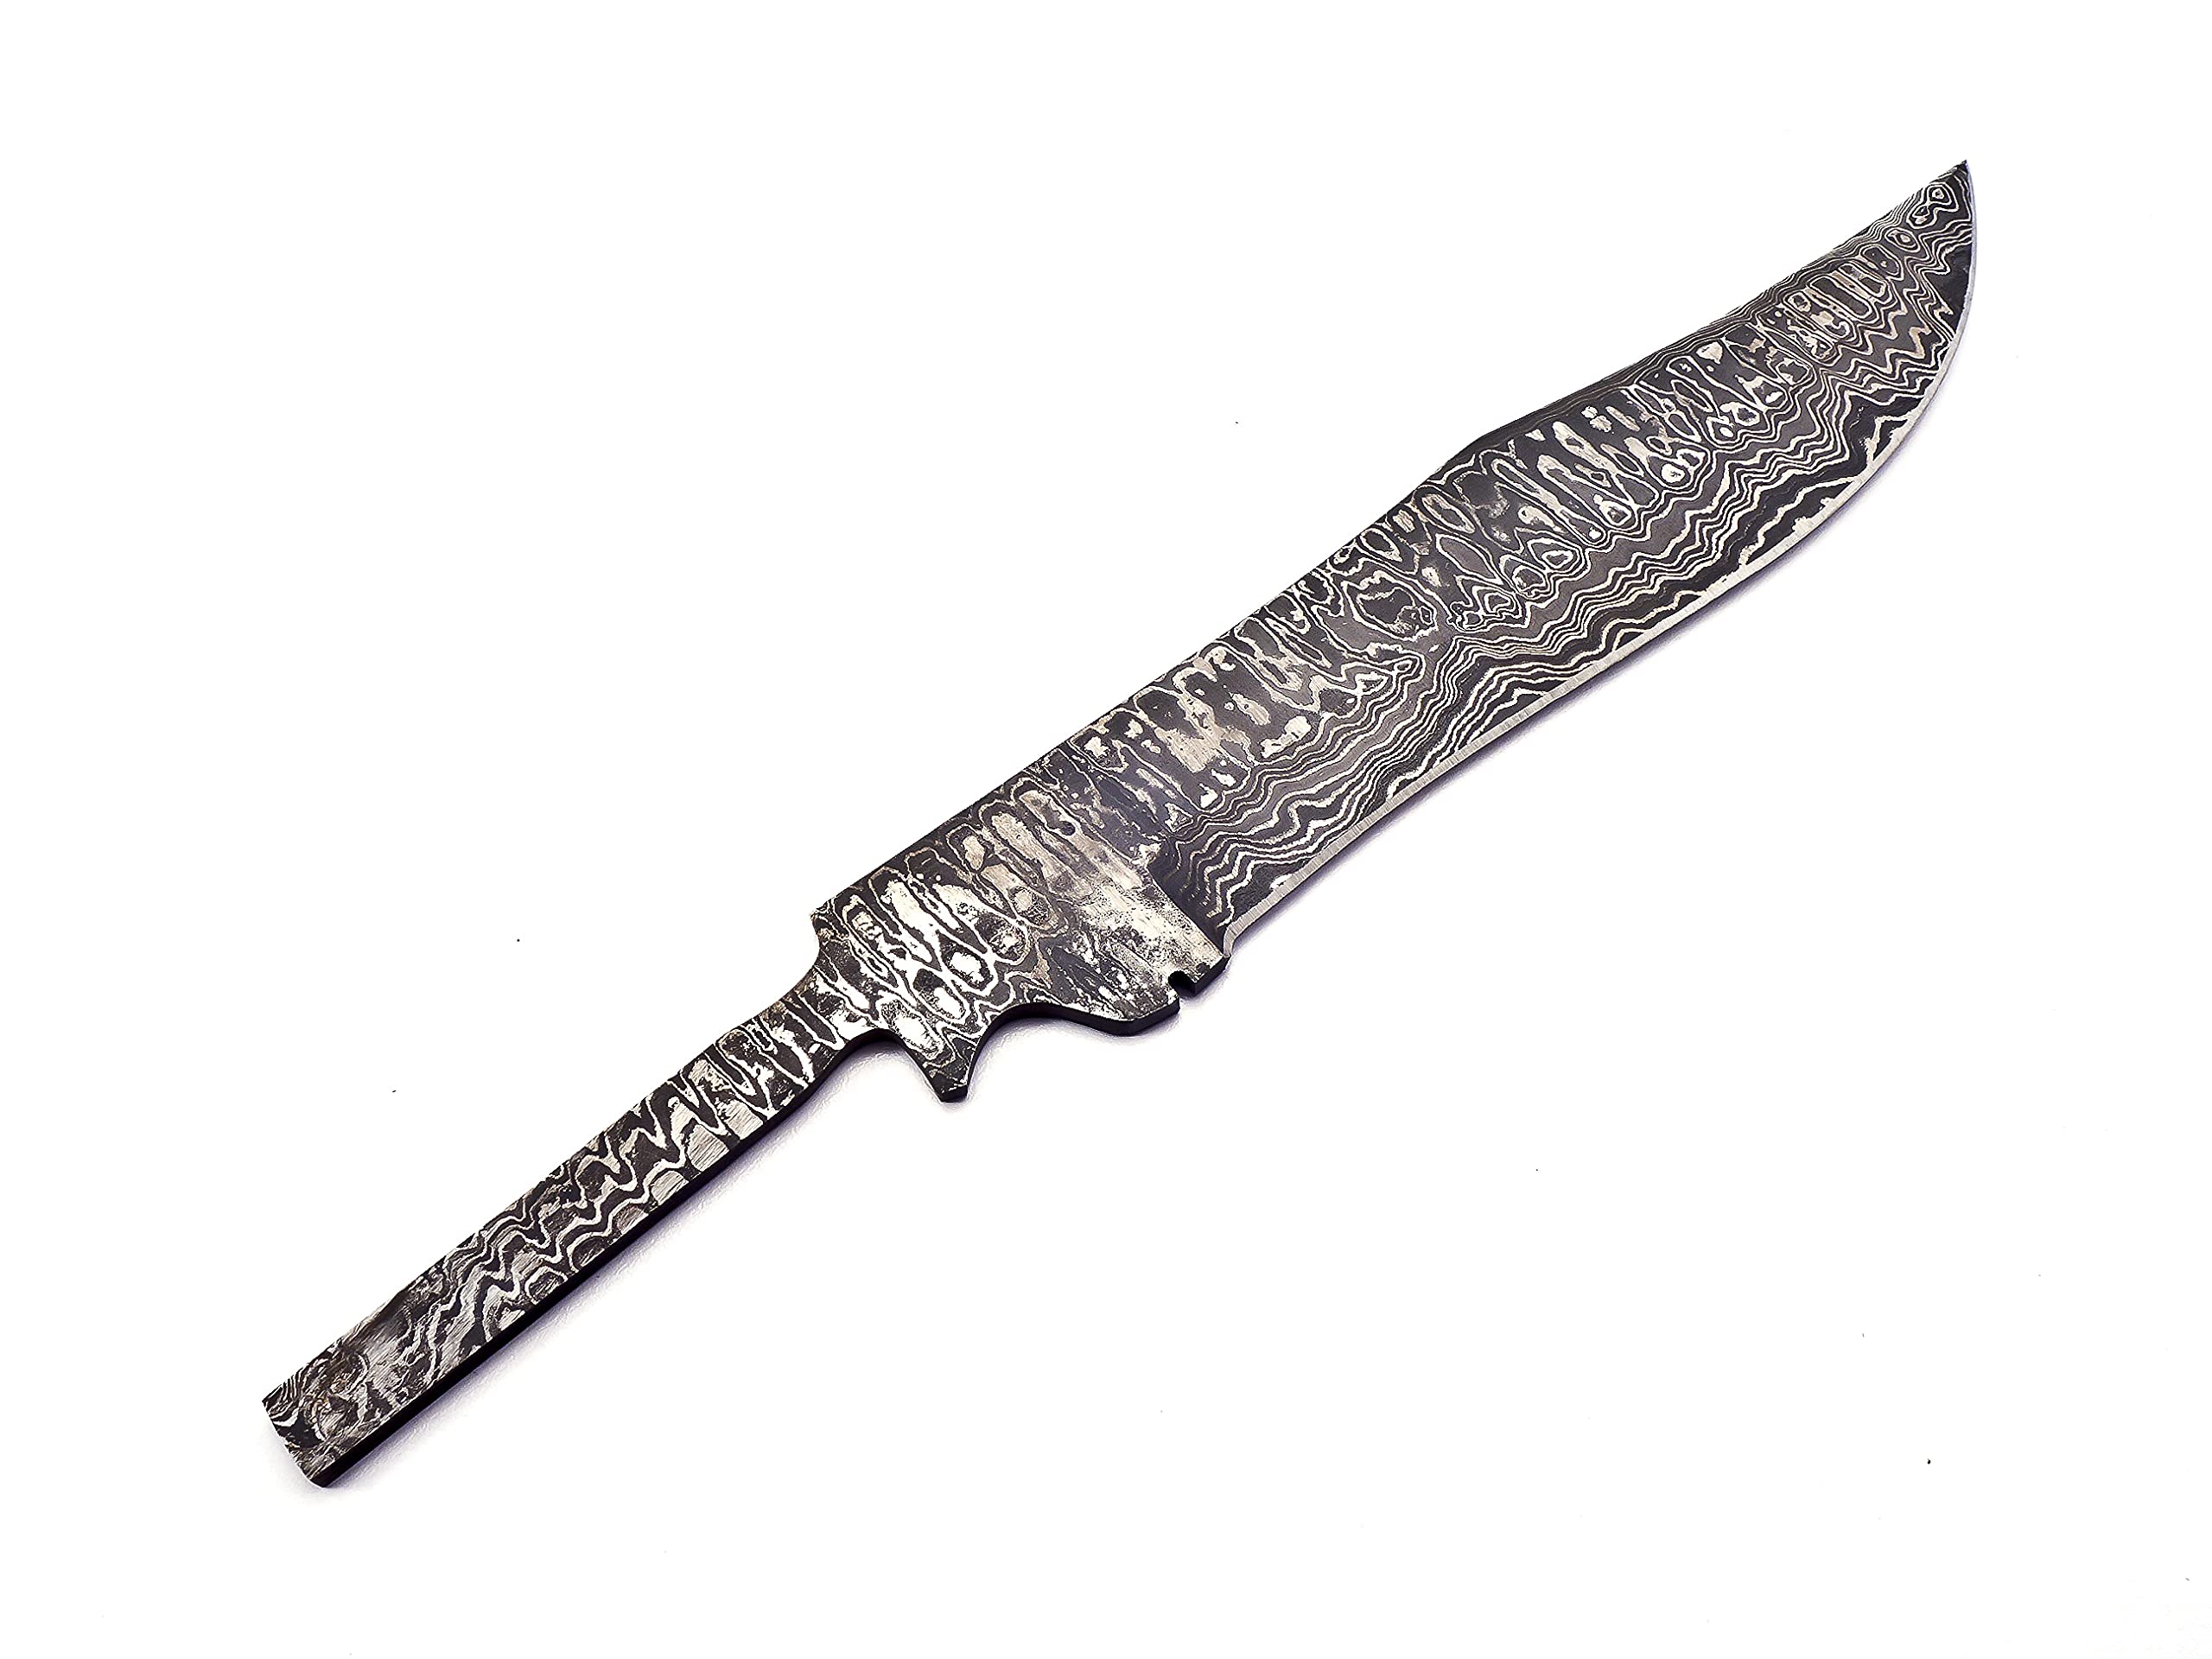 BB-4040 Handmade Damascus Steel 15 Inches Blank Blade Knife Beautiful Pattern on the Blade, Make your own desire of Handle and be proud of your work